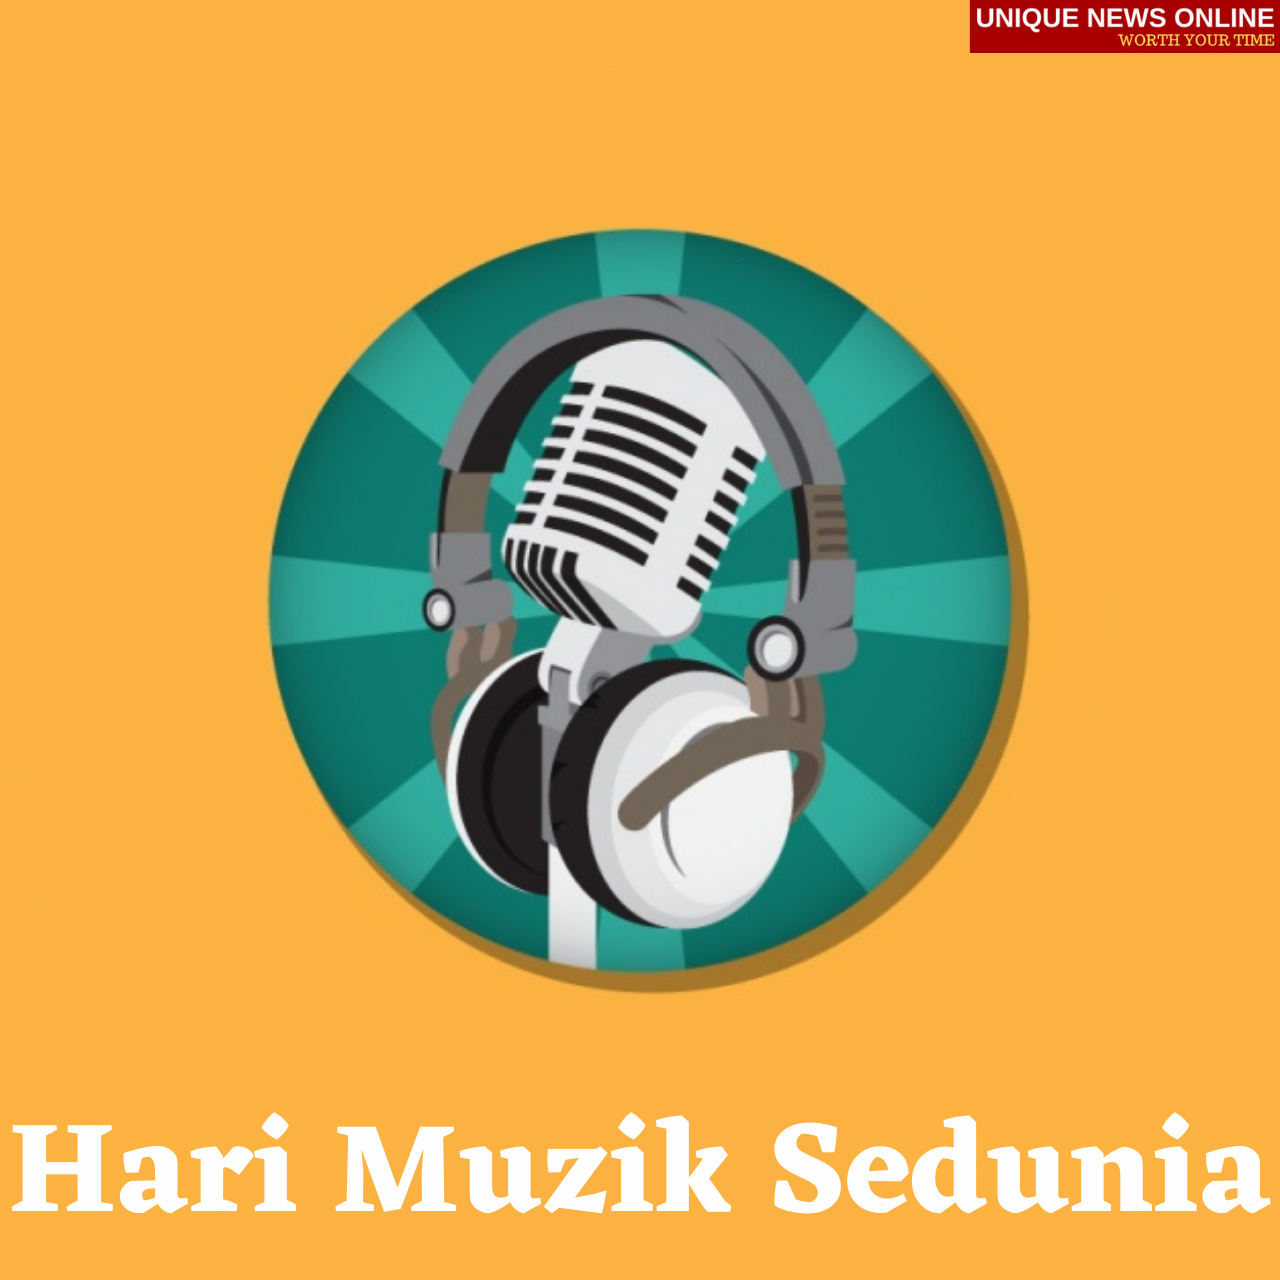 Hari Muzik Sedunia 2021 Malay Wishes, Images, Quotes, Greetings, and Messages to Share